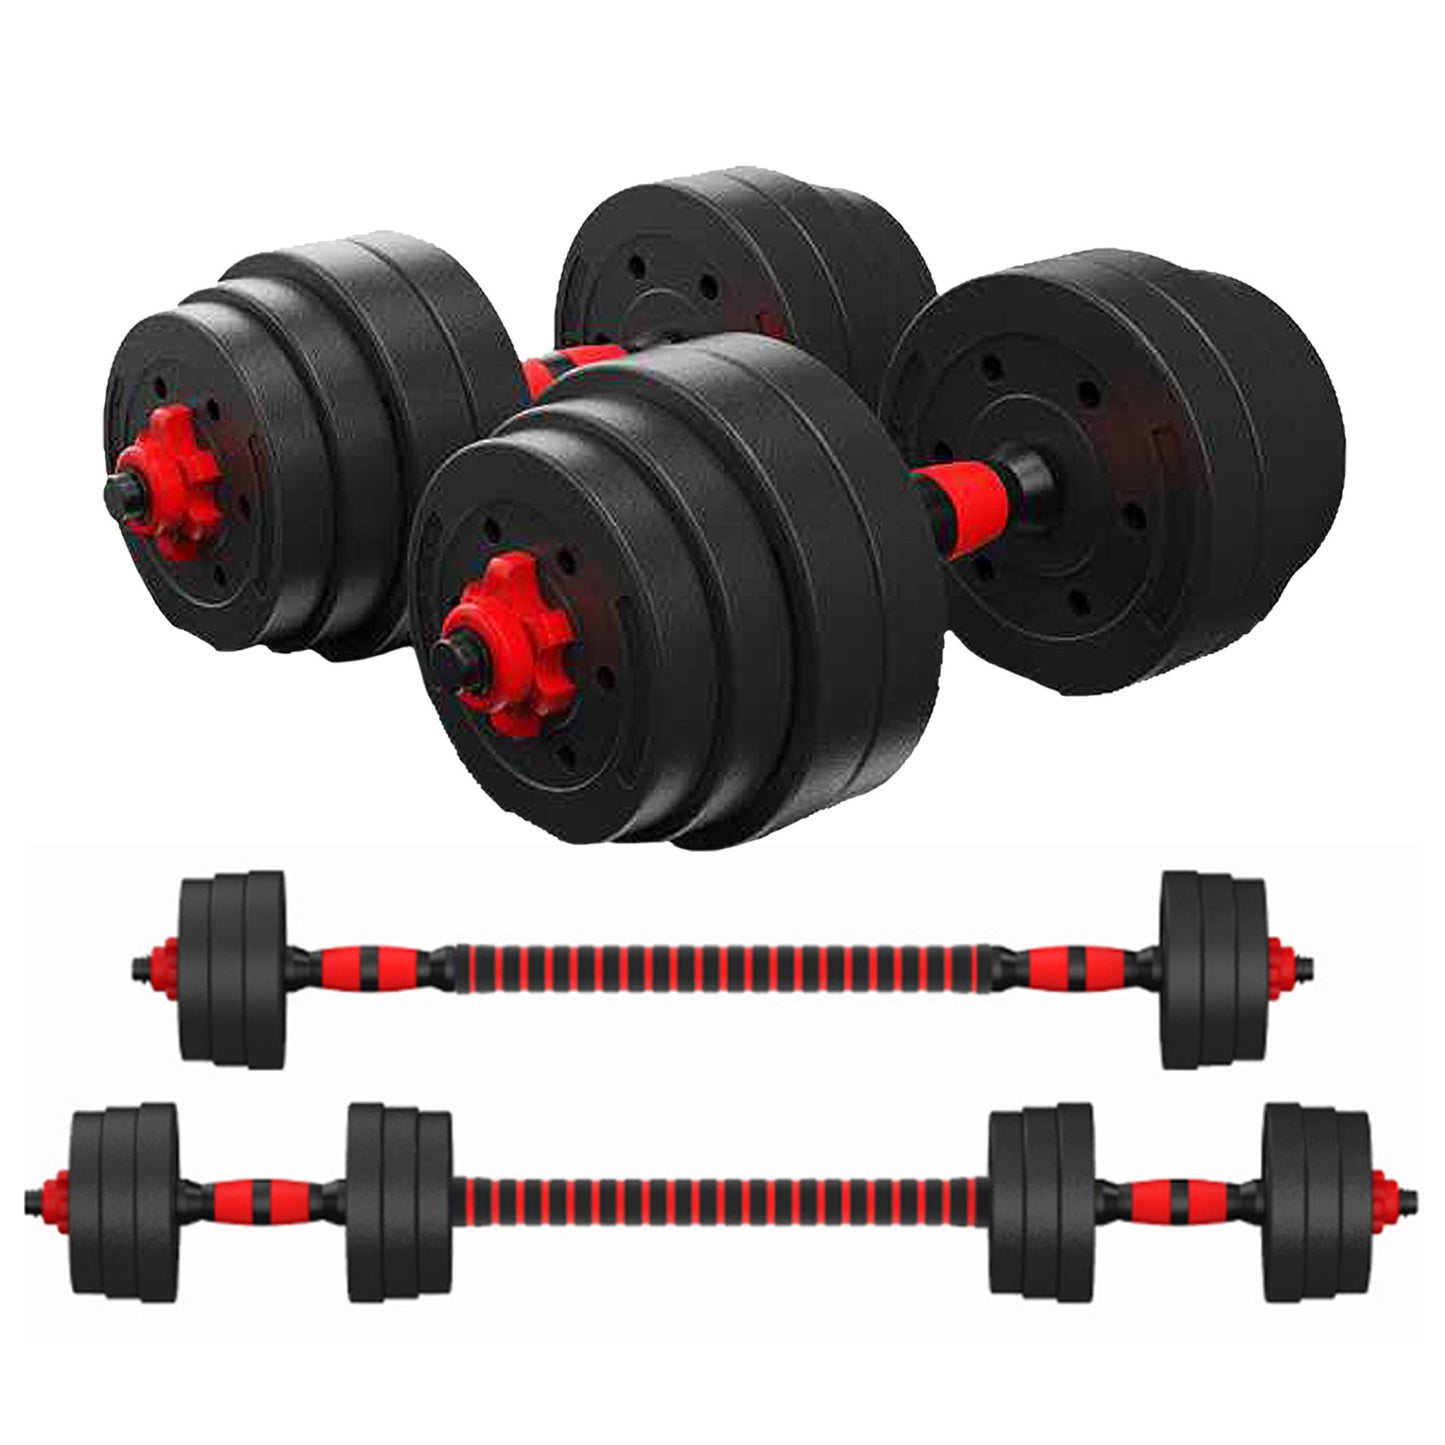 40kg weight pair for intense home fitness